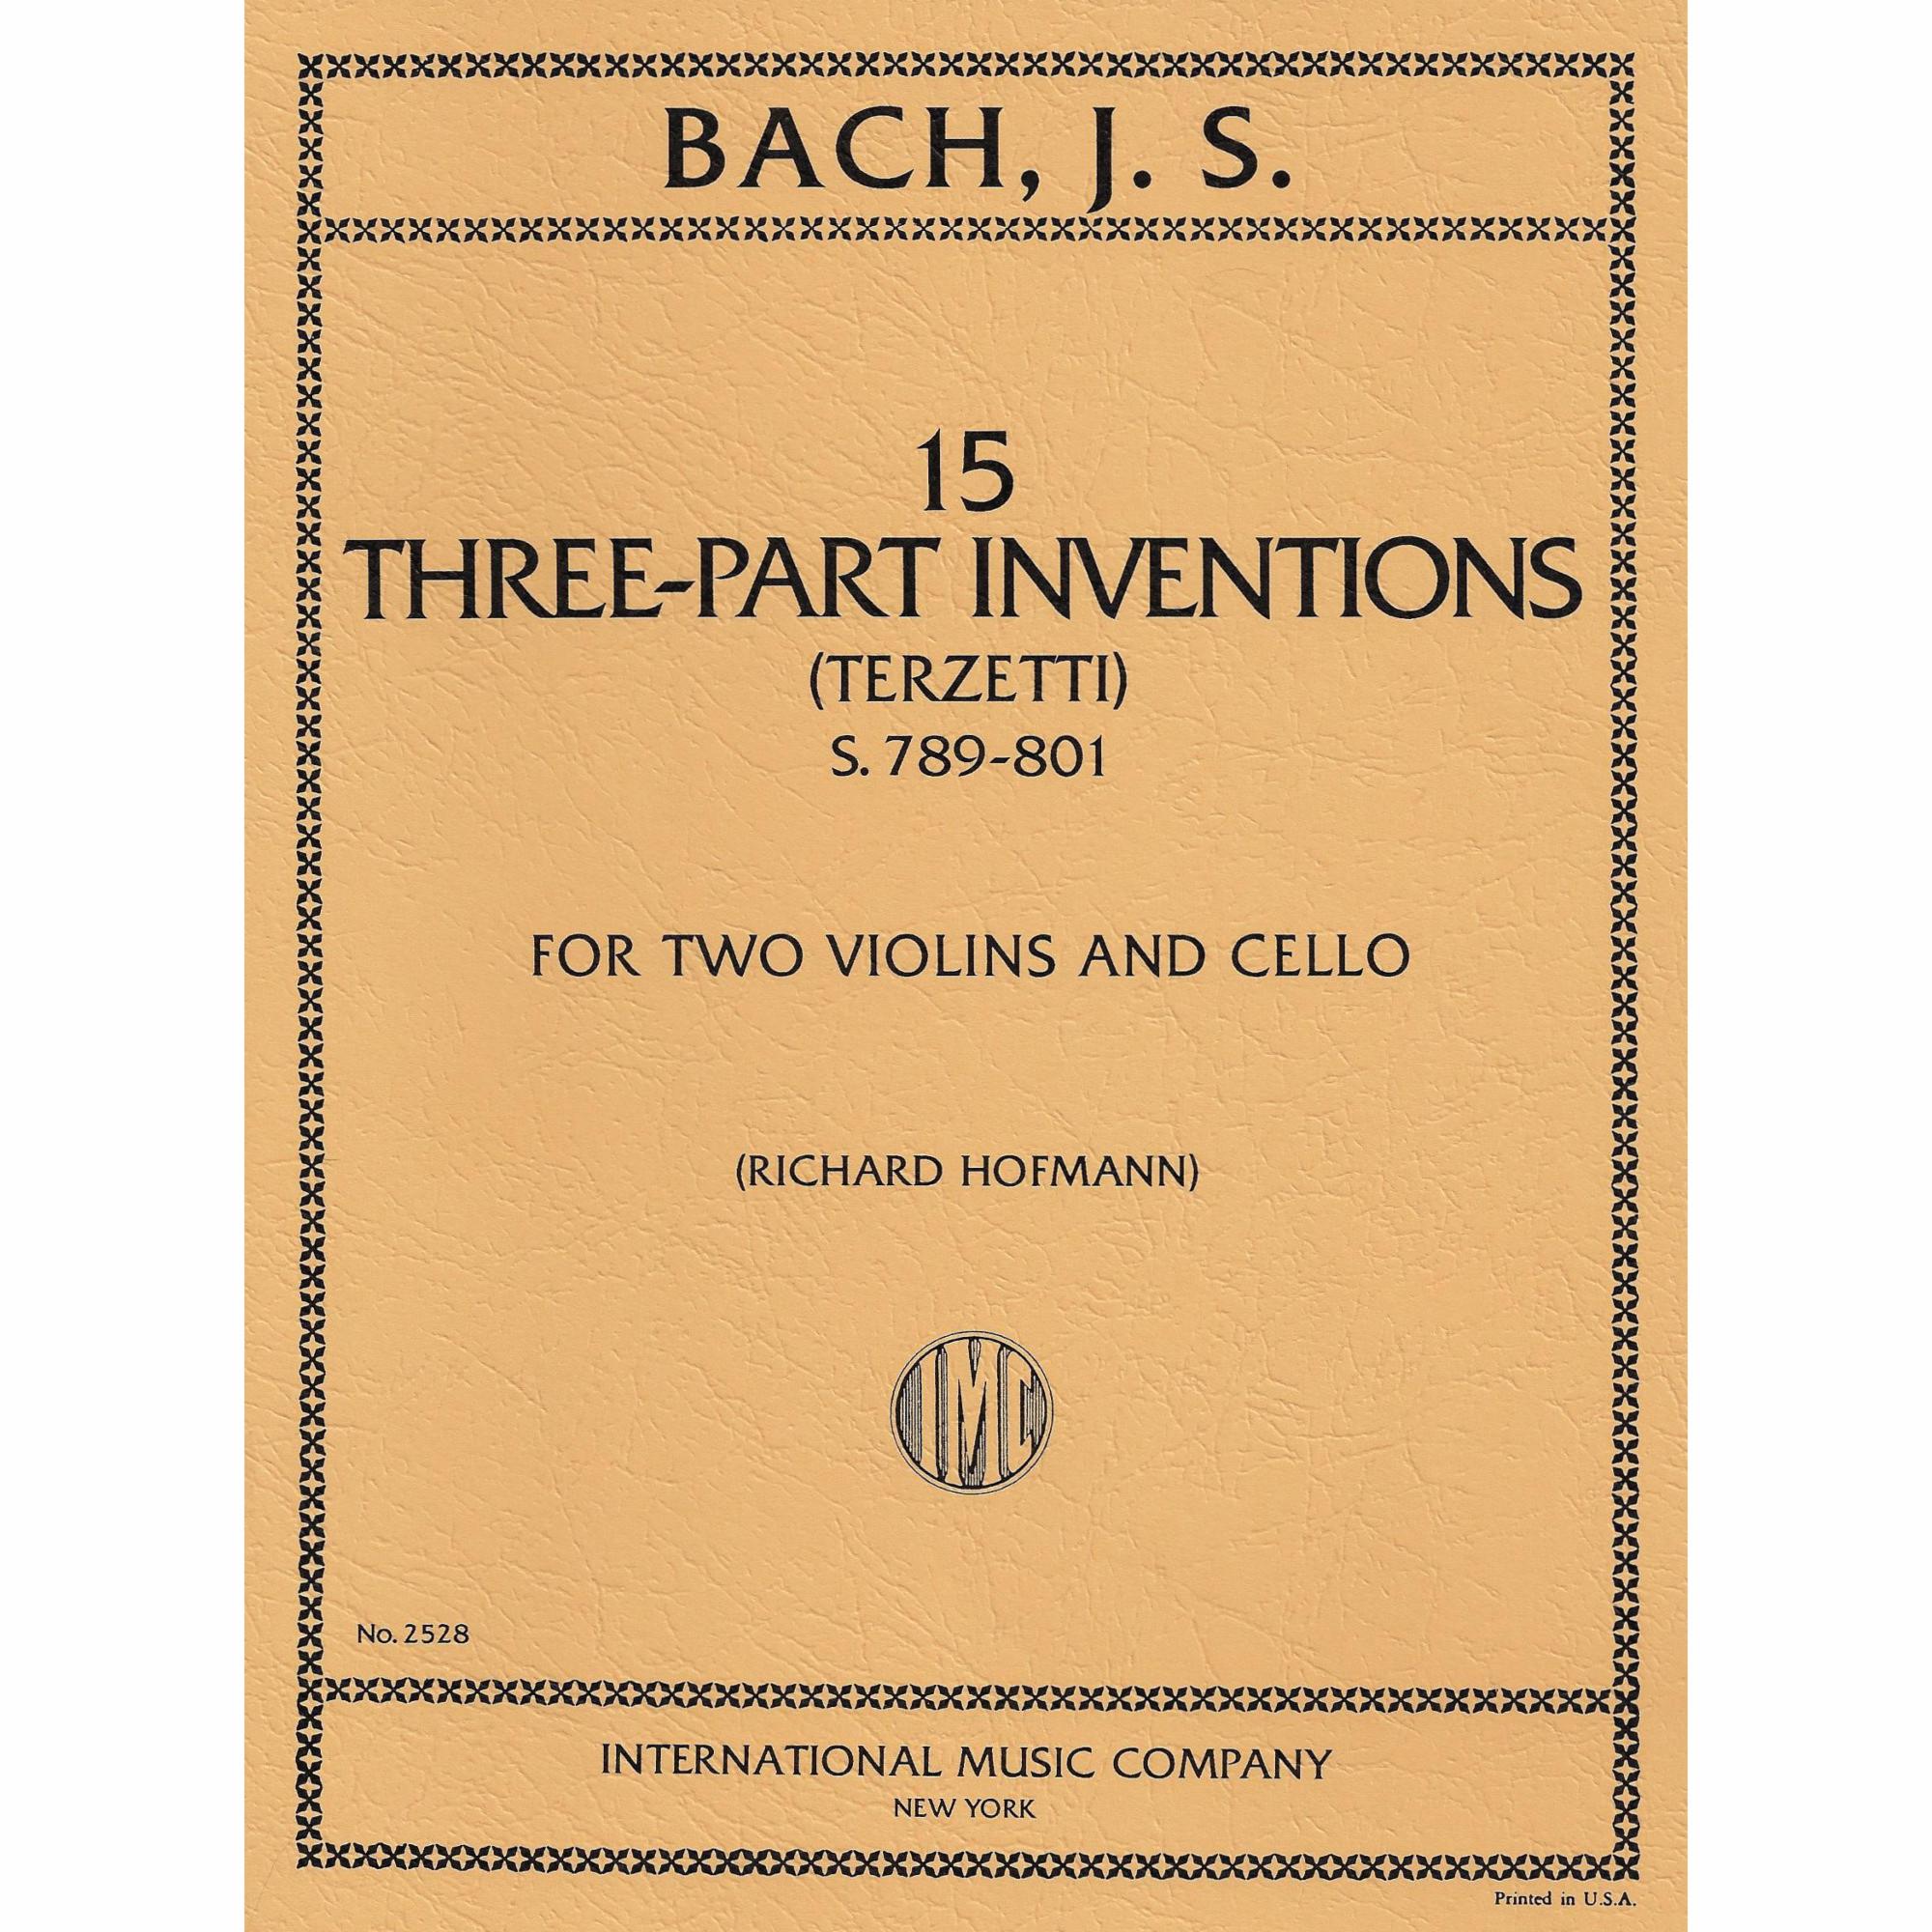 Bach -- 15 Three-Part Inventions for Two Violins and Cello